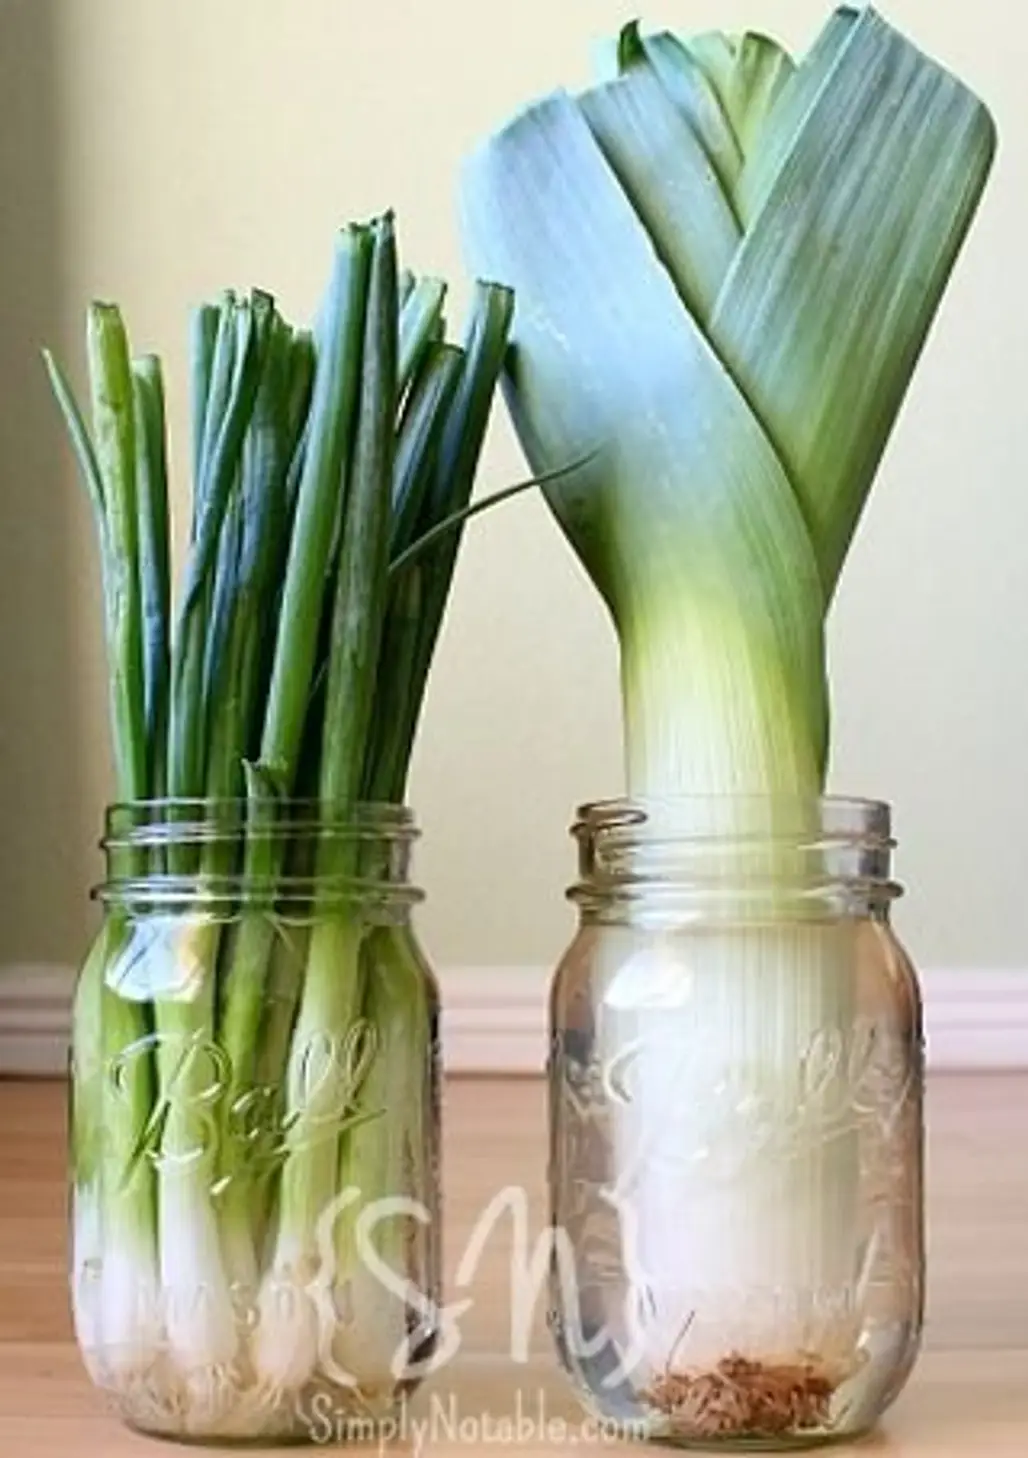 Grow Leeks and Onions in a Jar